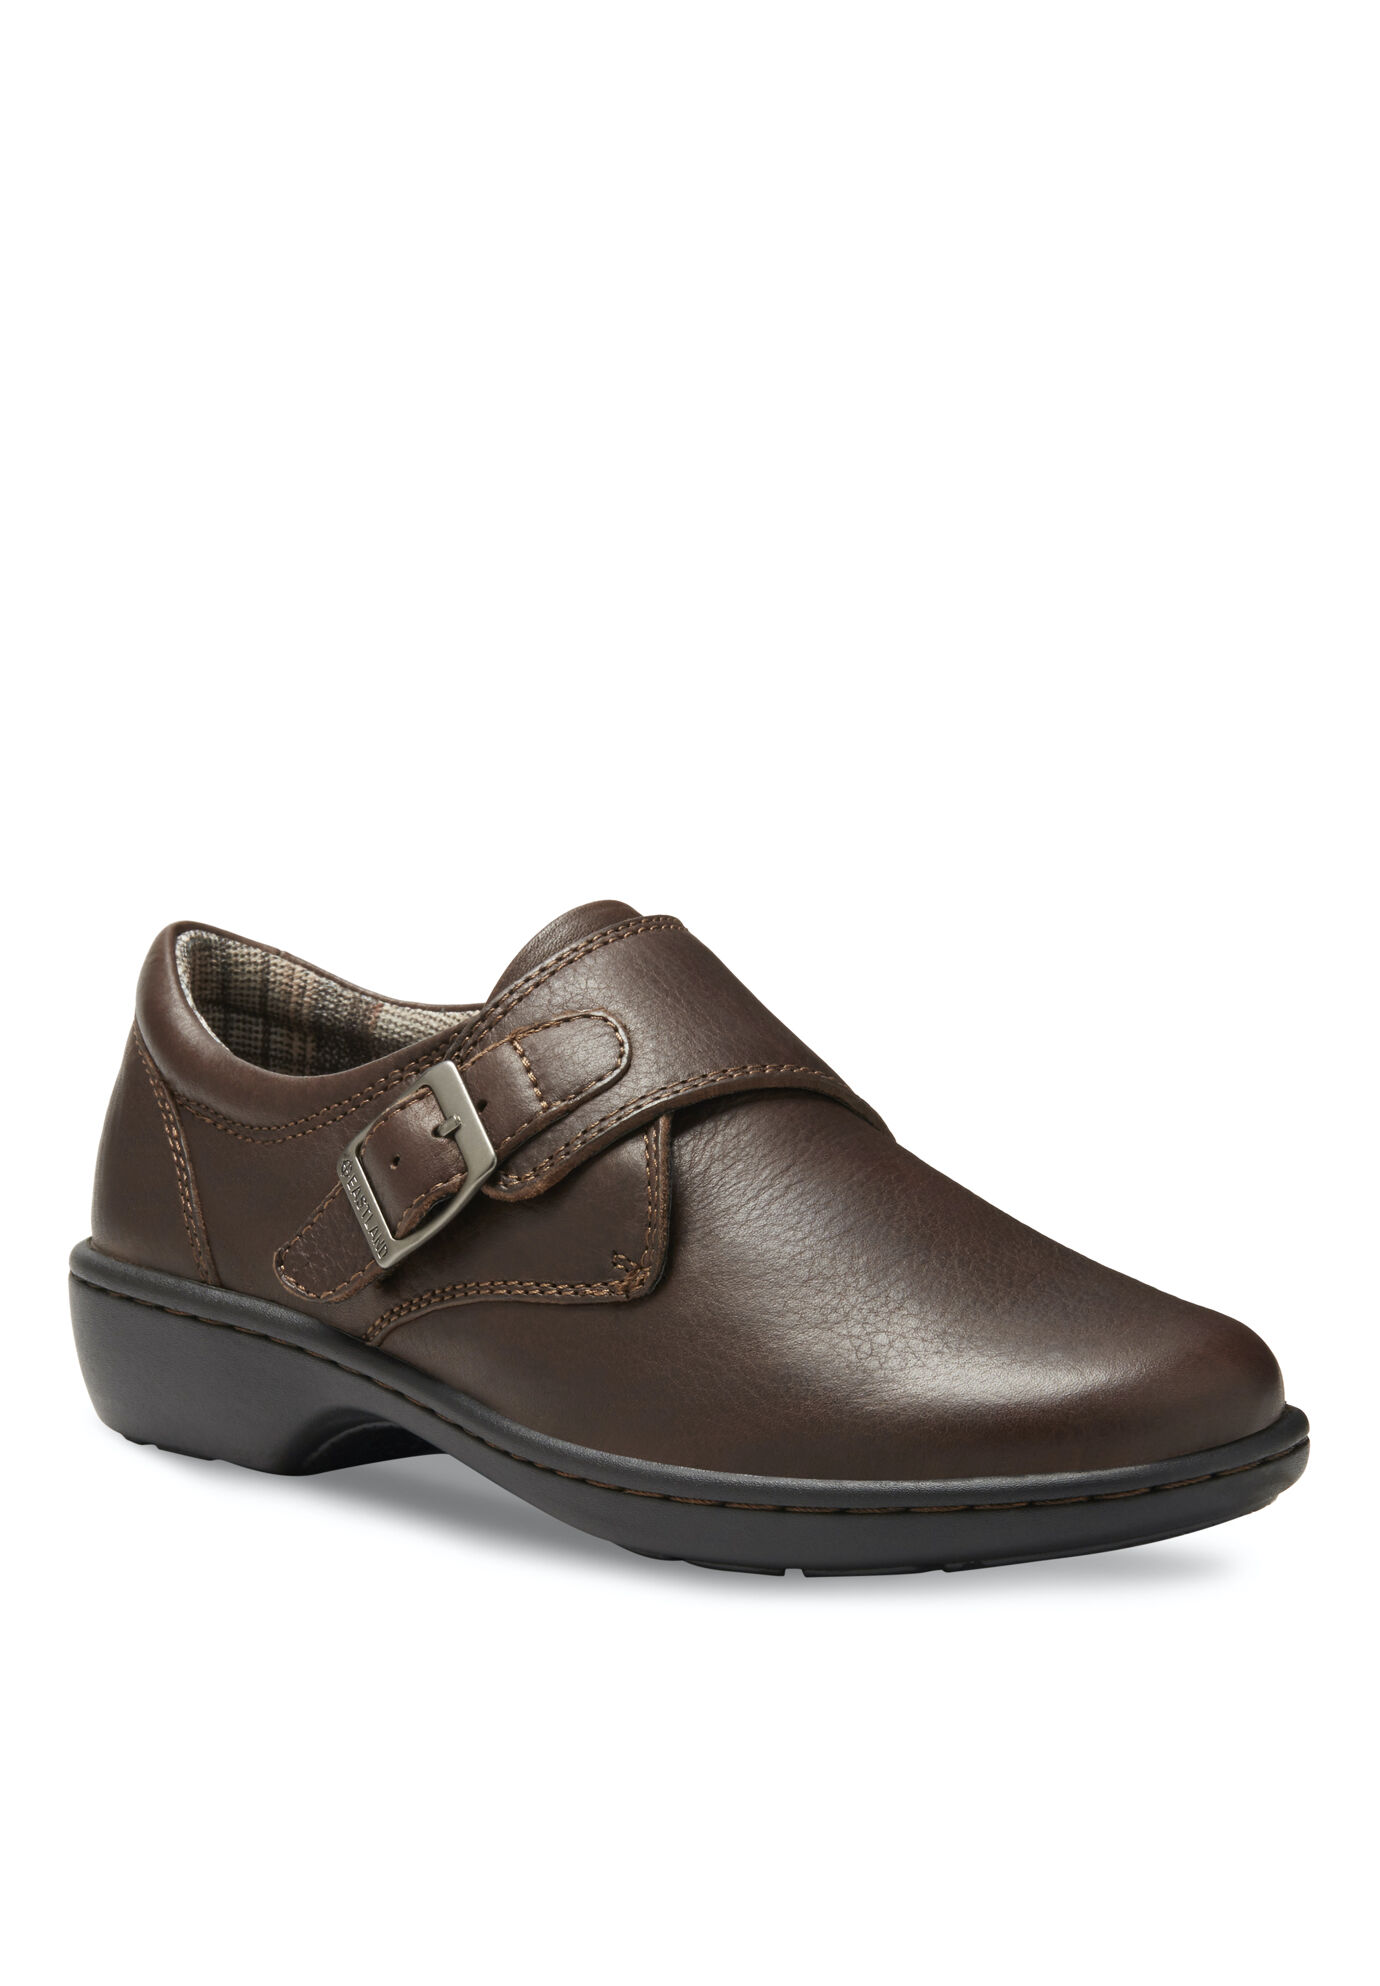 Women's Anna Slip On by Eastland in Brown (Size 7 1/2 M)